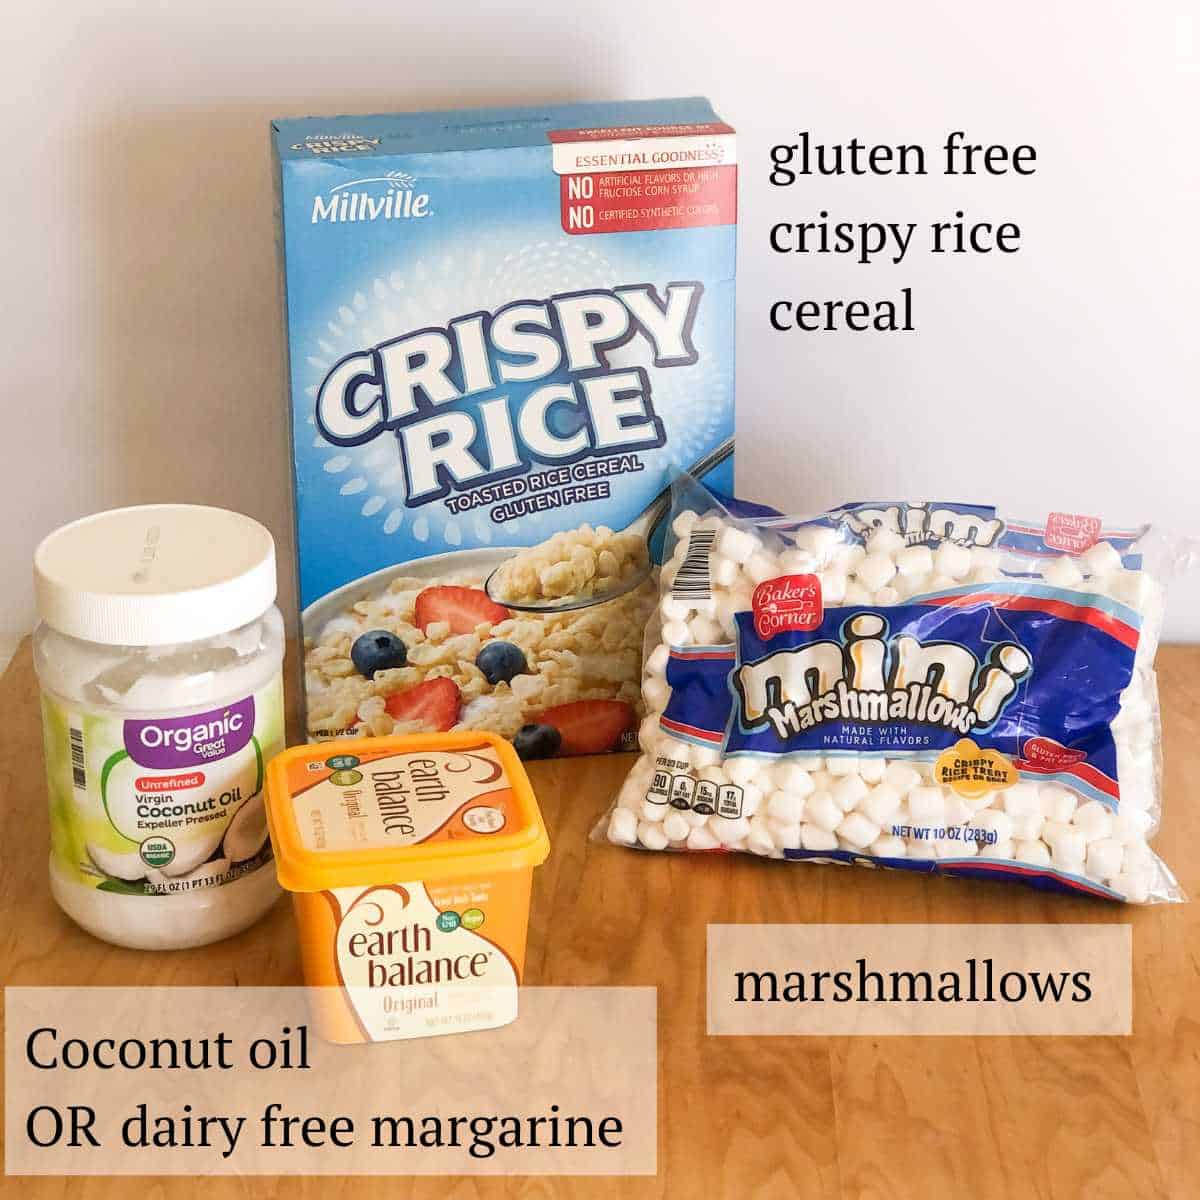 dairy free rice krispie treats ingredients: coconut oil or dairy free margarine, marshmallows, and gluten free crispy rice cereal.